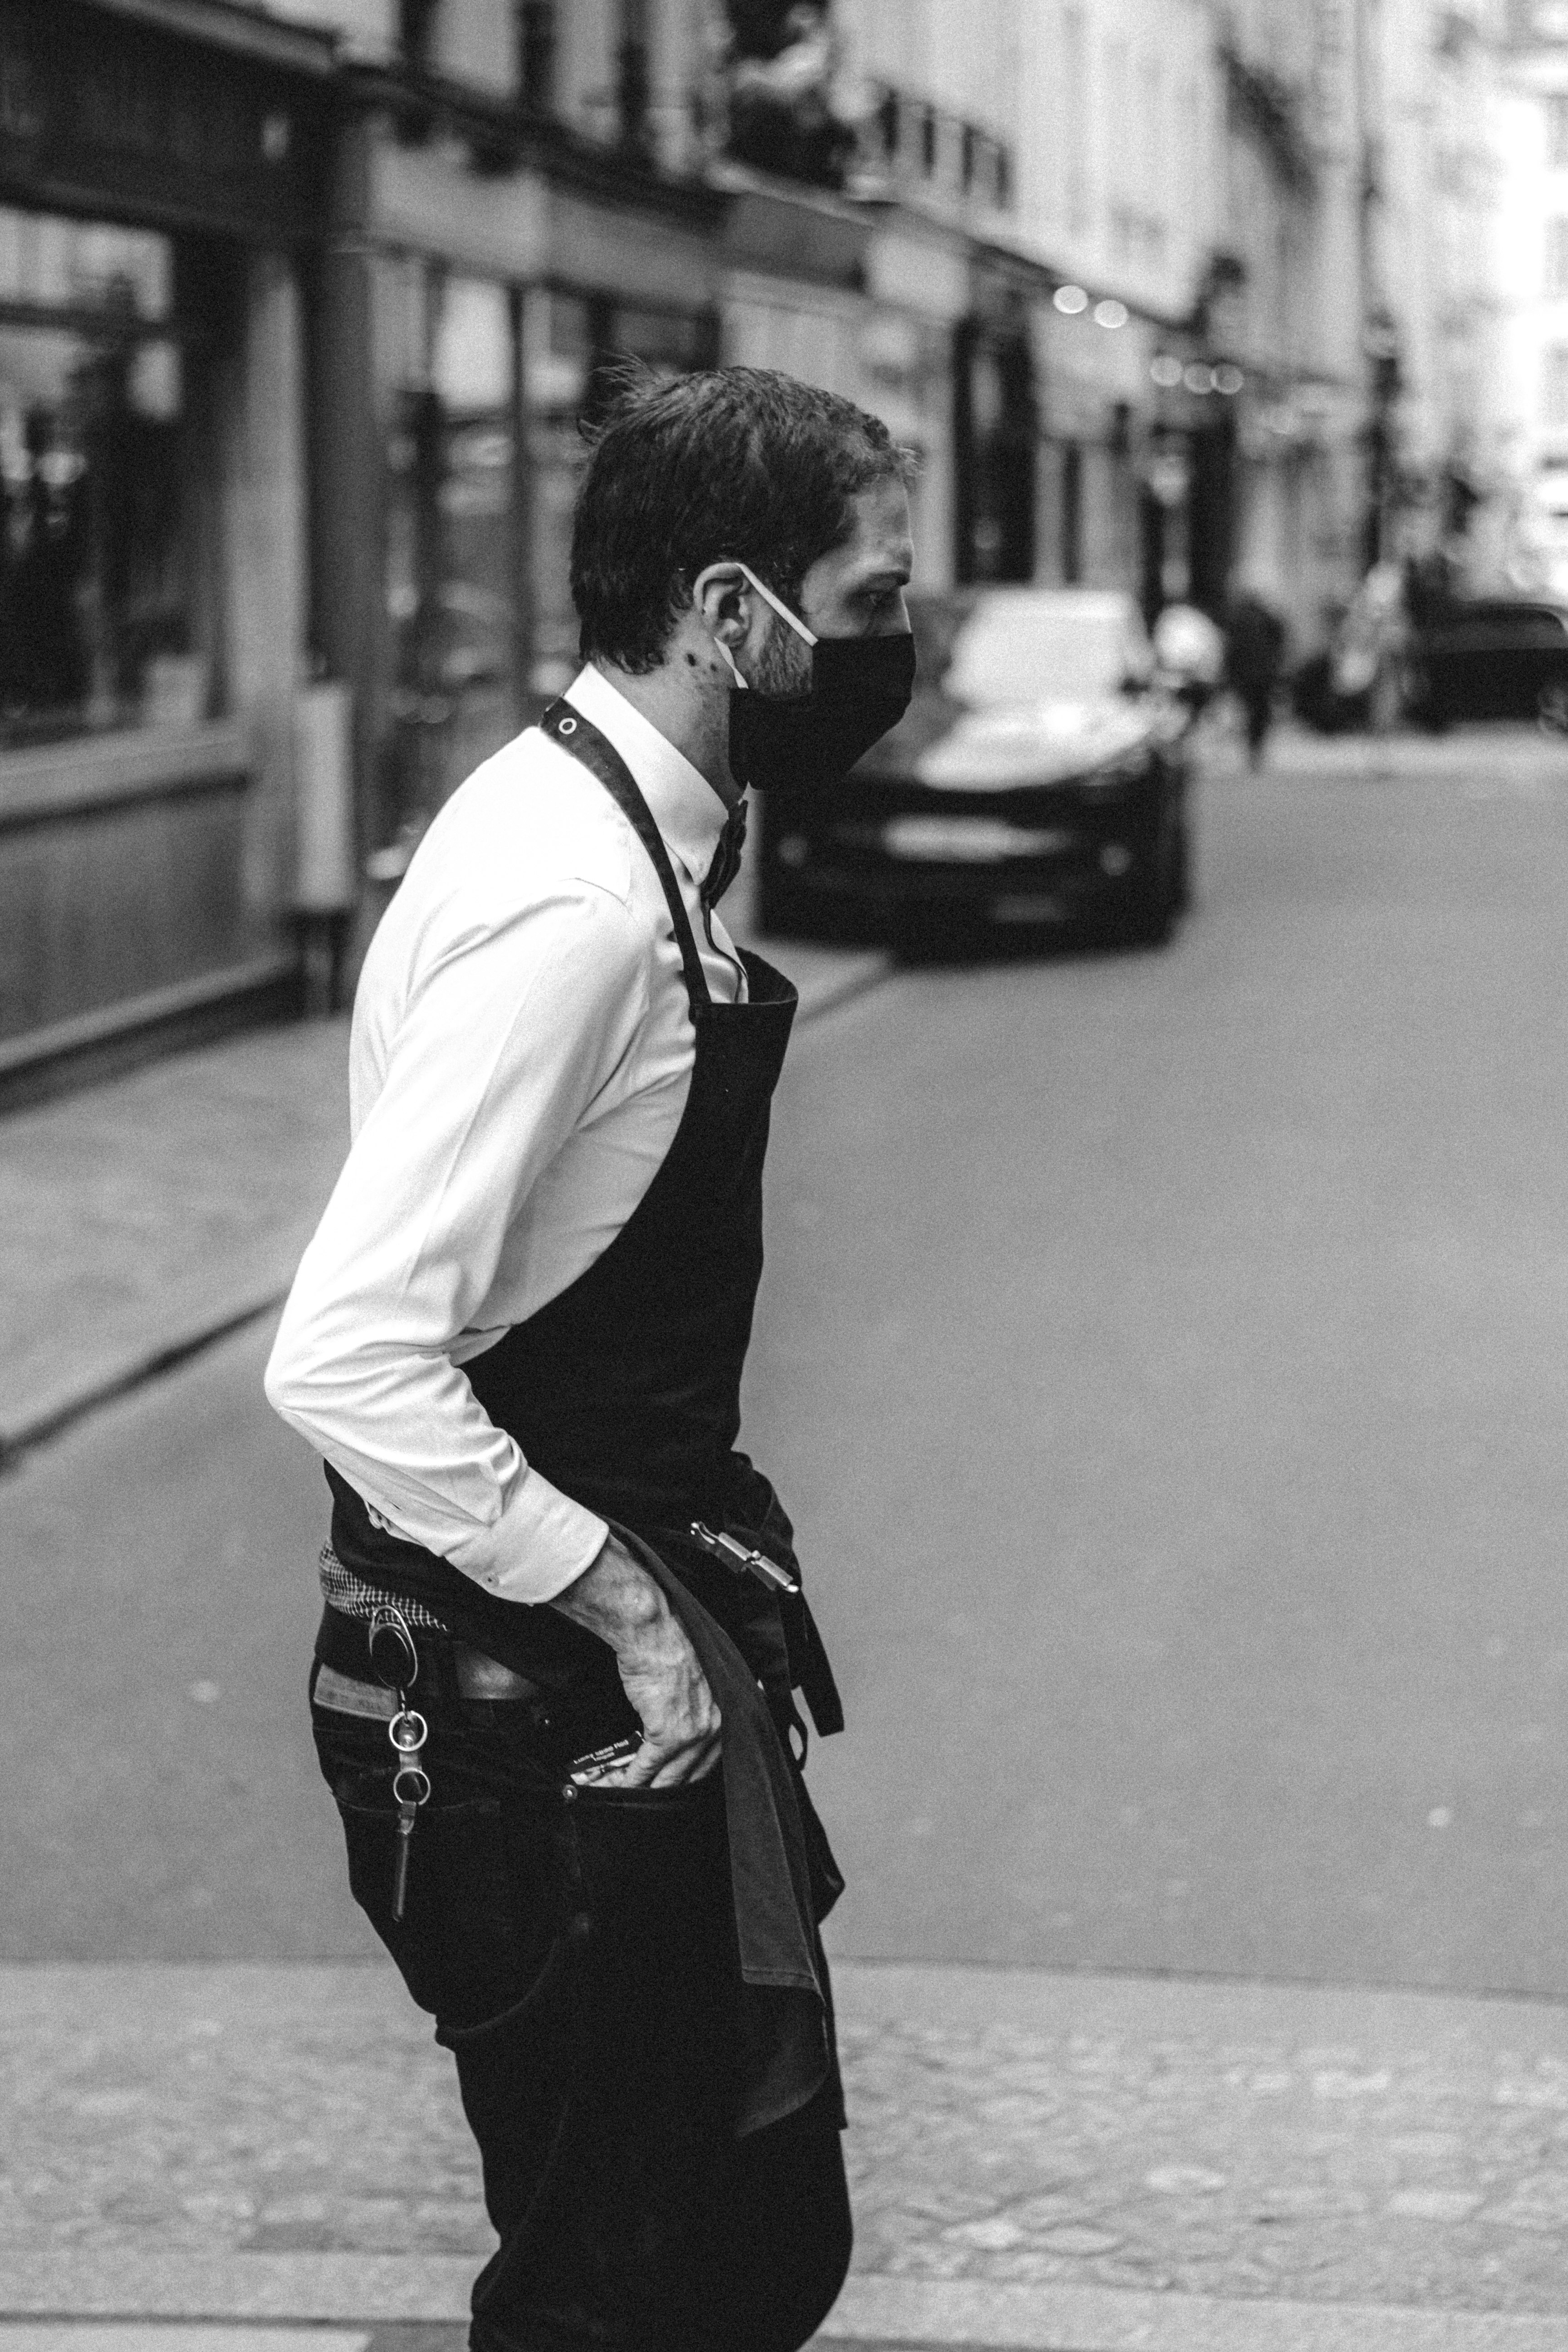 man in white dress shirt and black dress pants standing on sidewalk in grayscale photography